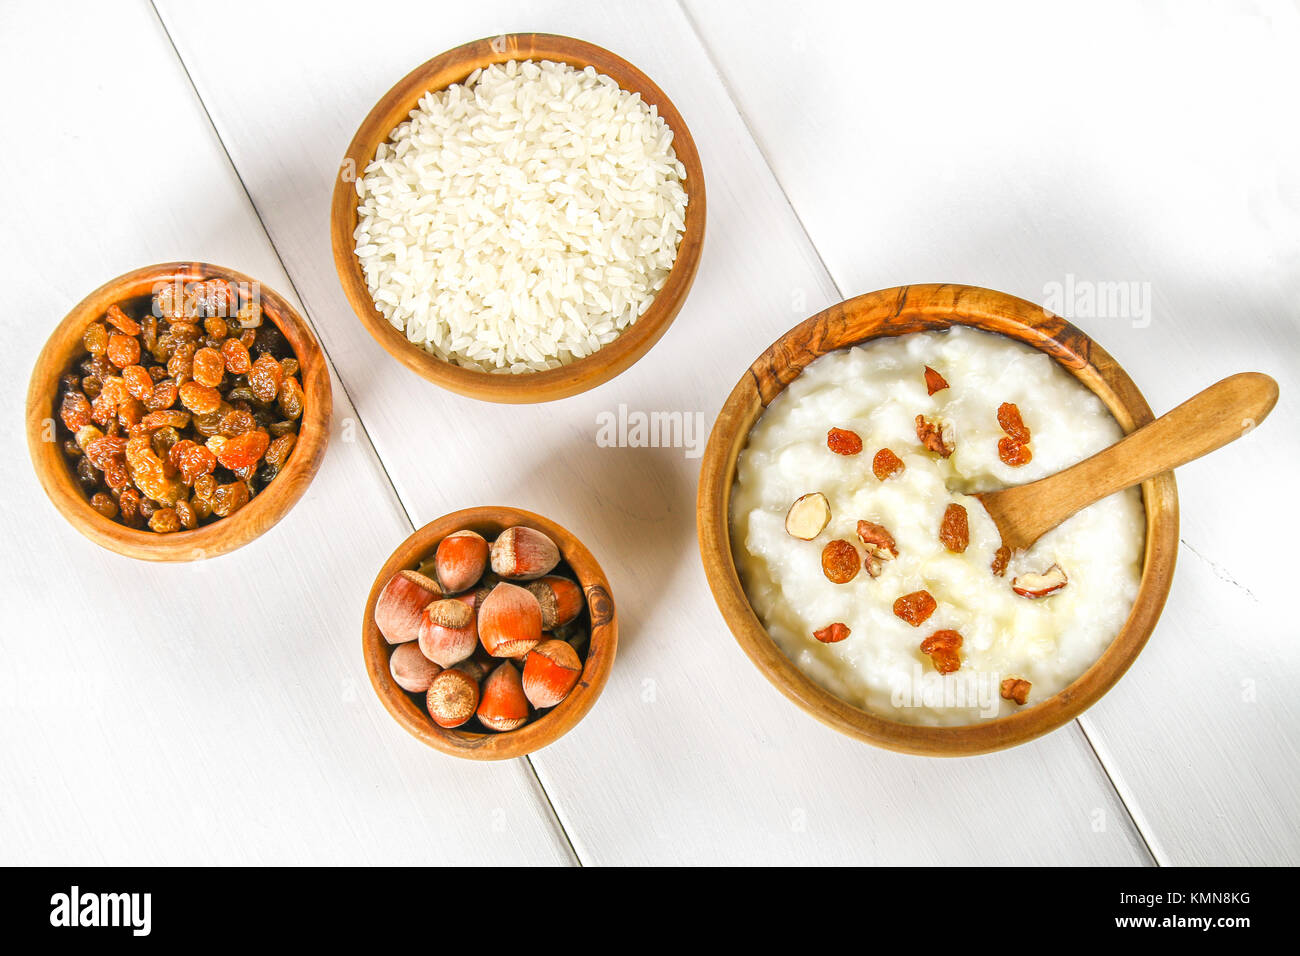 Rice milk porridge with nuts and raisins in wooden bowls on a white wooden table Stock Photo